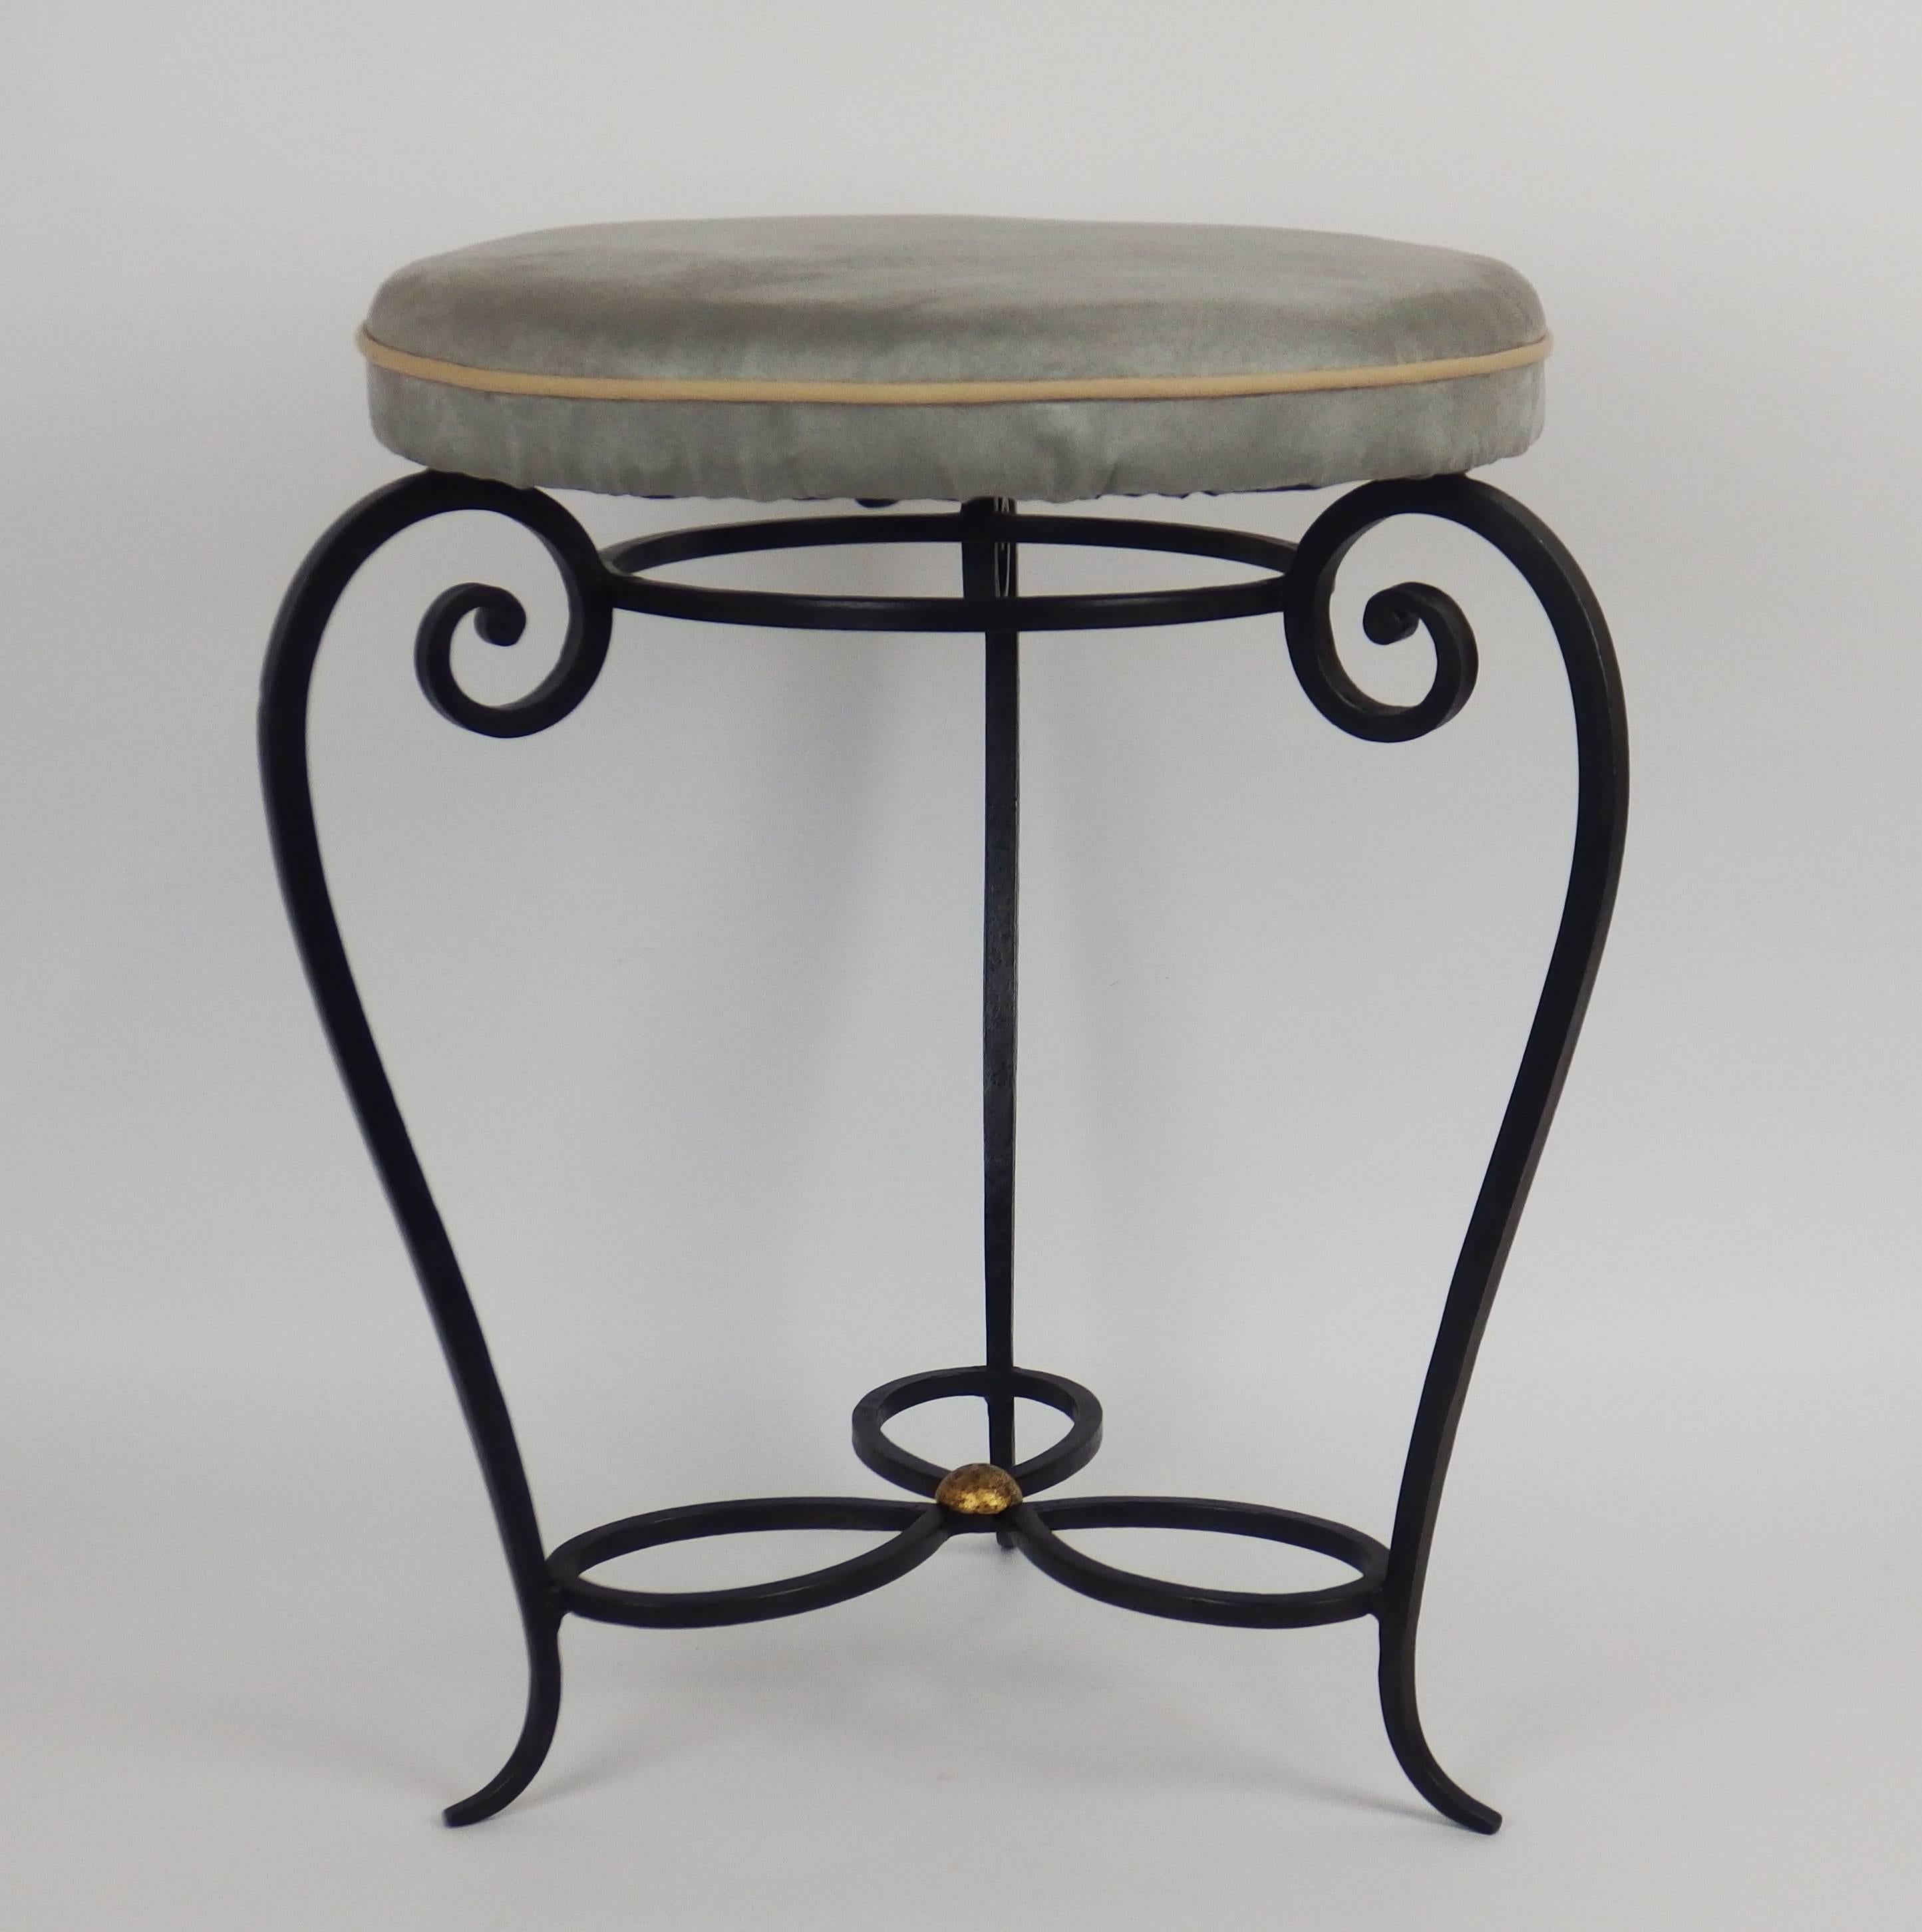 A 1940s wrought iron pair of stools with a black patina.